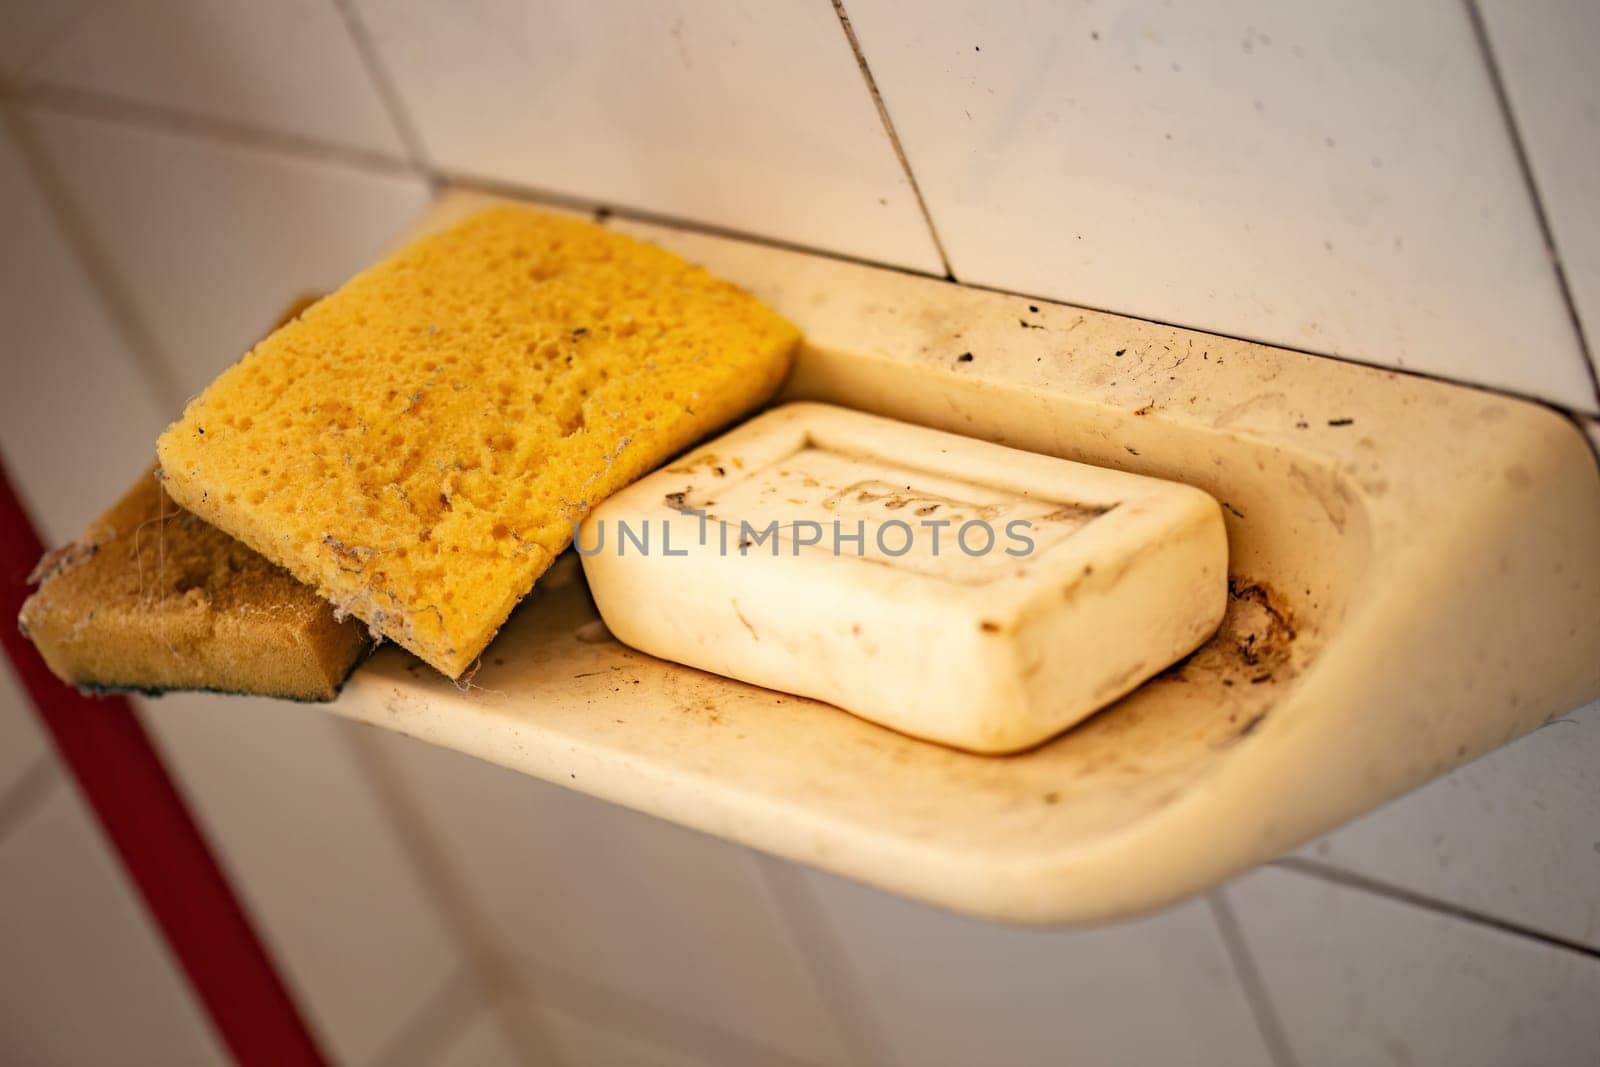 A worn and dirty soap dish holding a bar of soap and a sponge in a rustic bathroom.